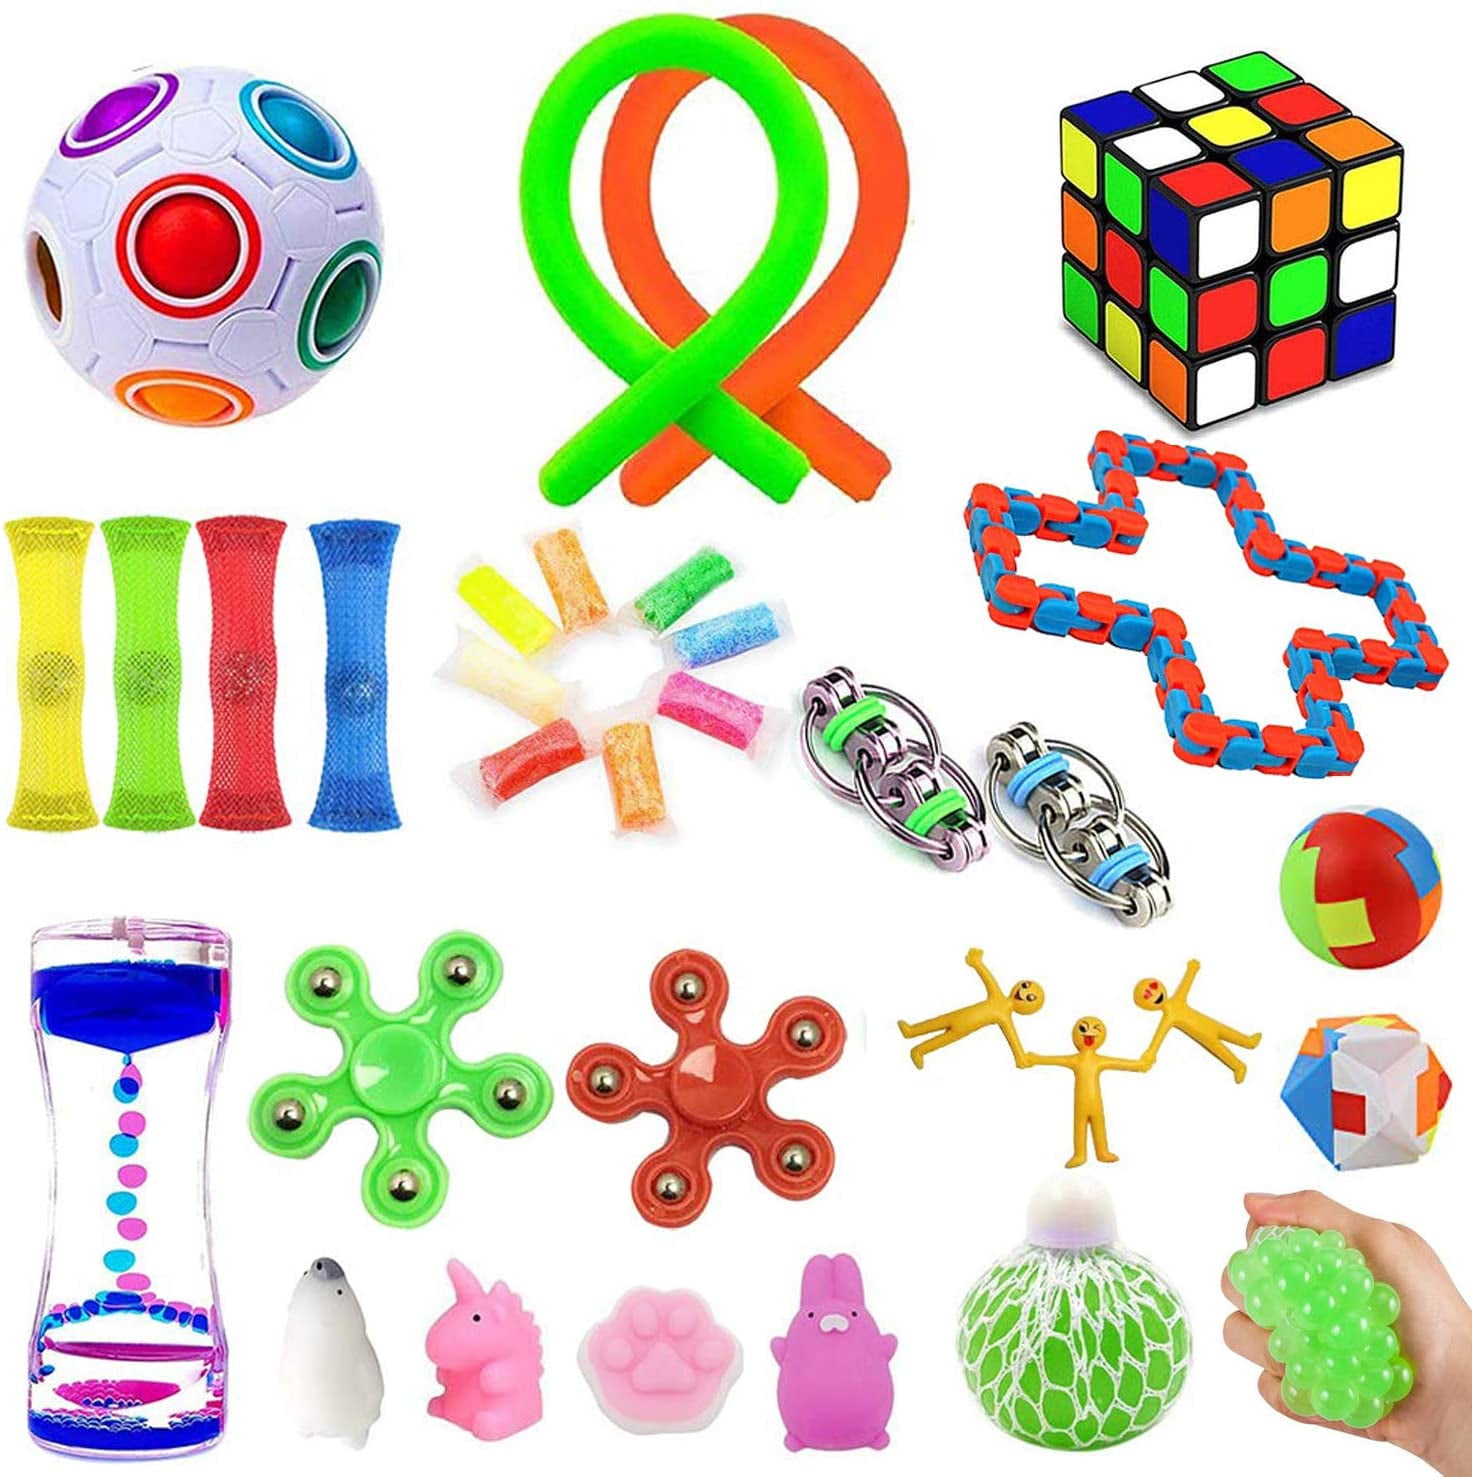 Special Education Fidget Toys Gadget For Kids Adult Help ADHD ADD OCD Autism LD